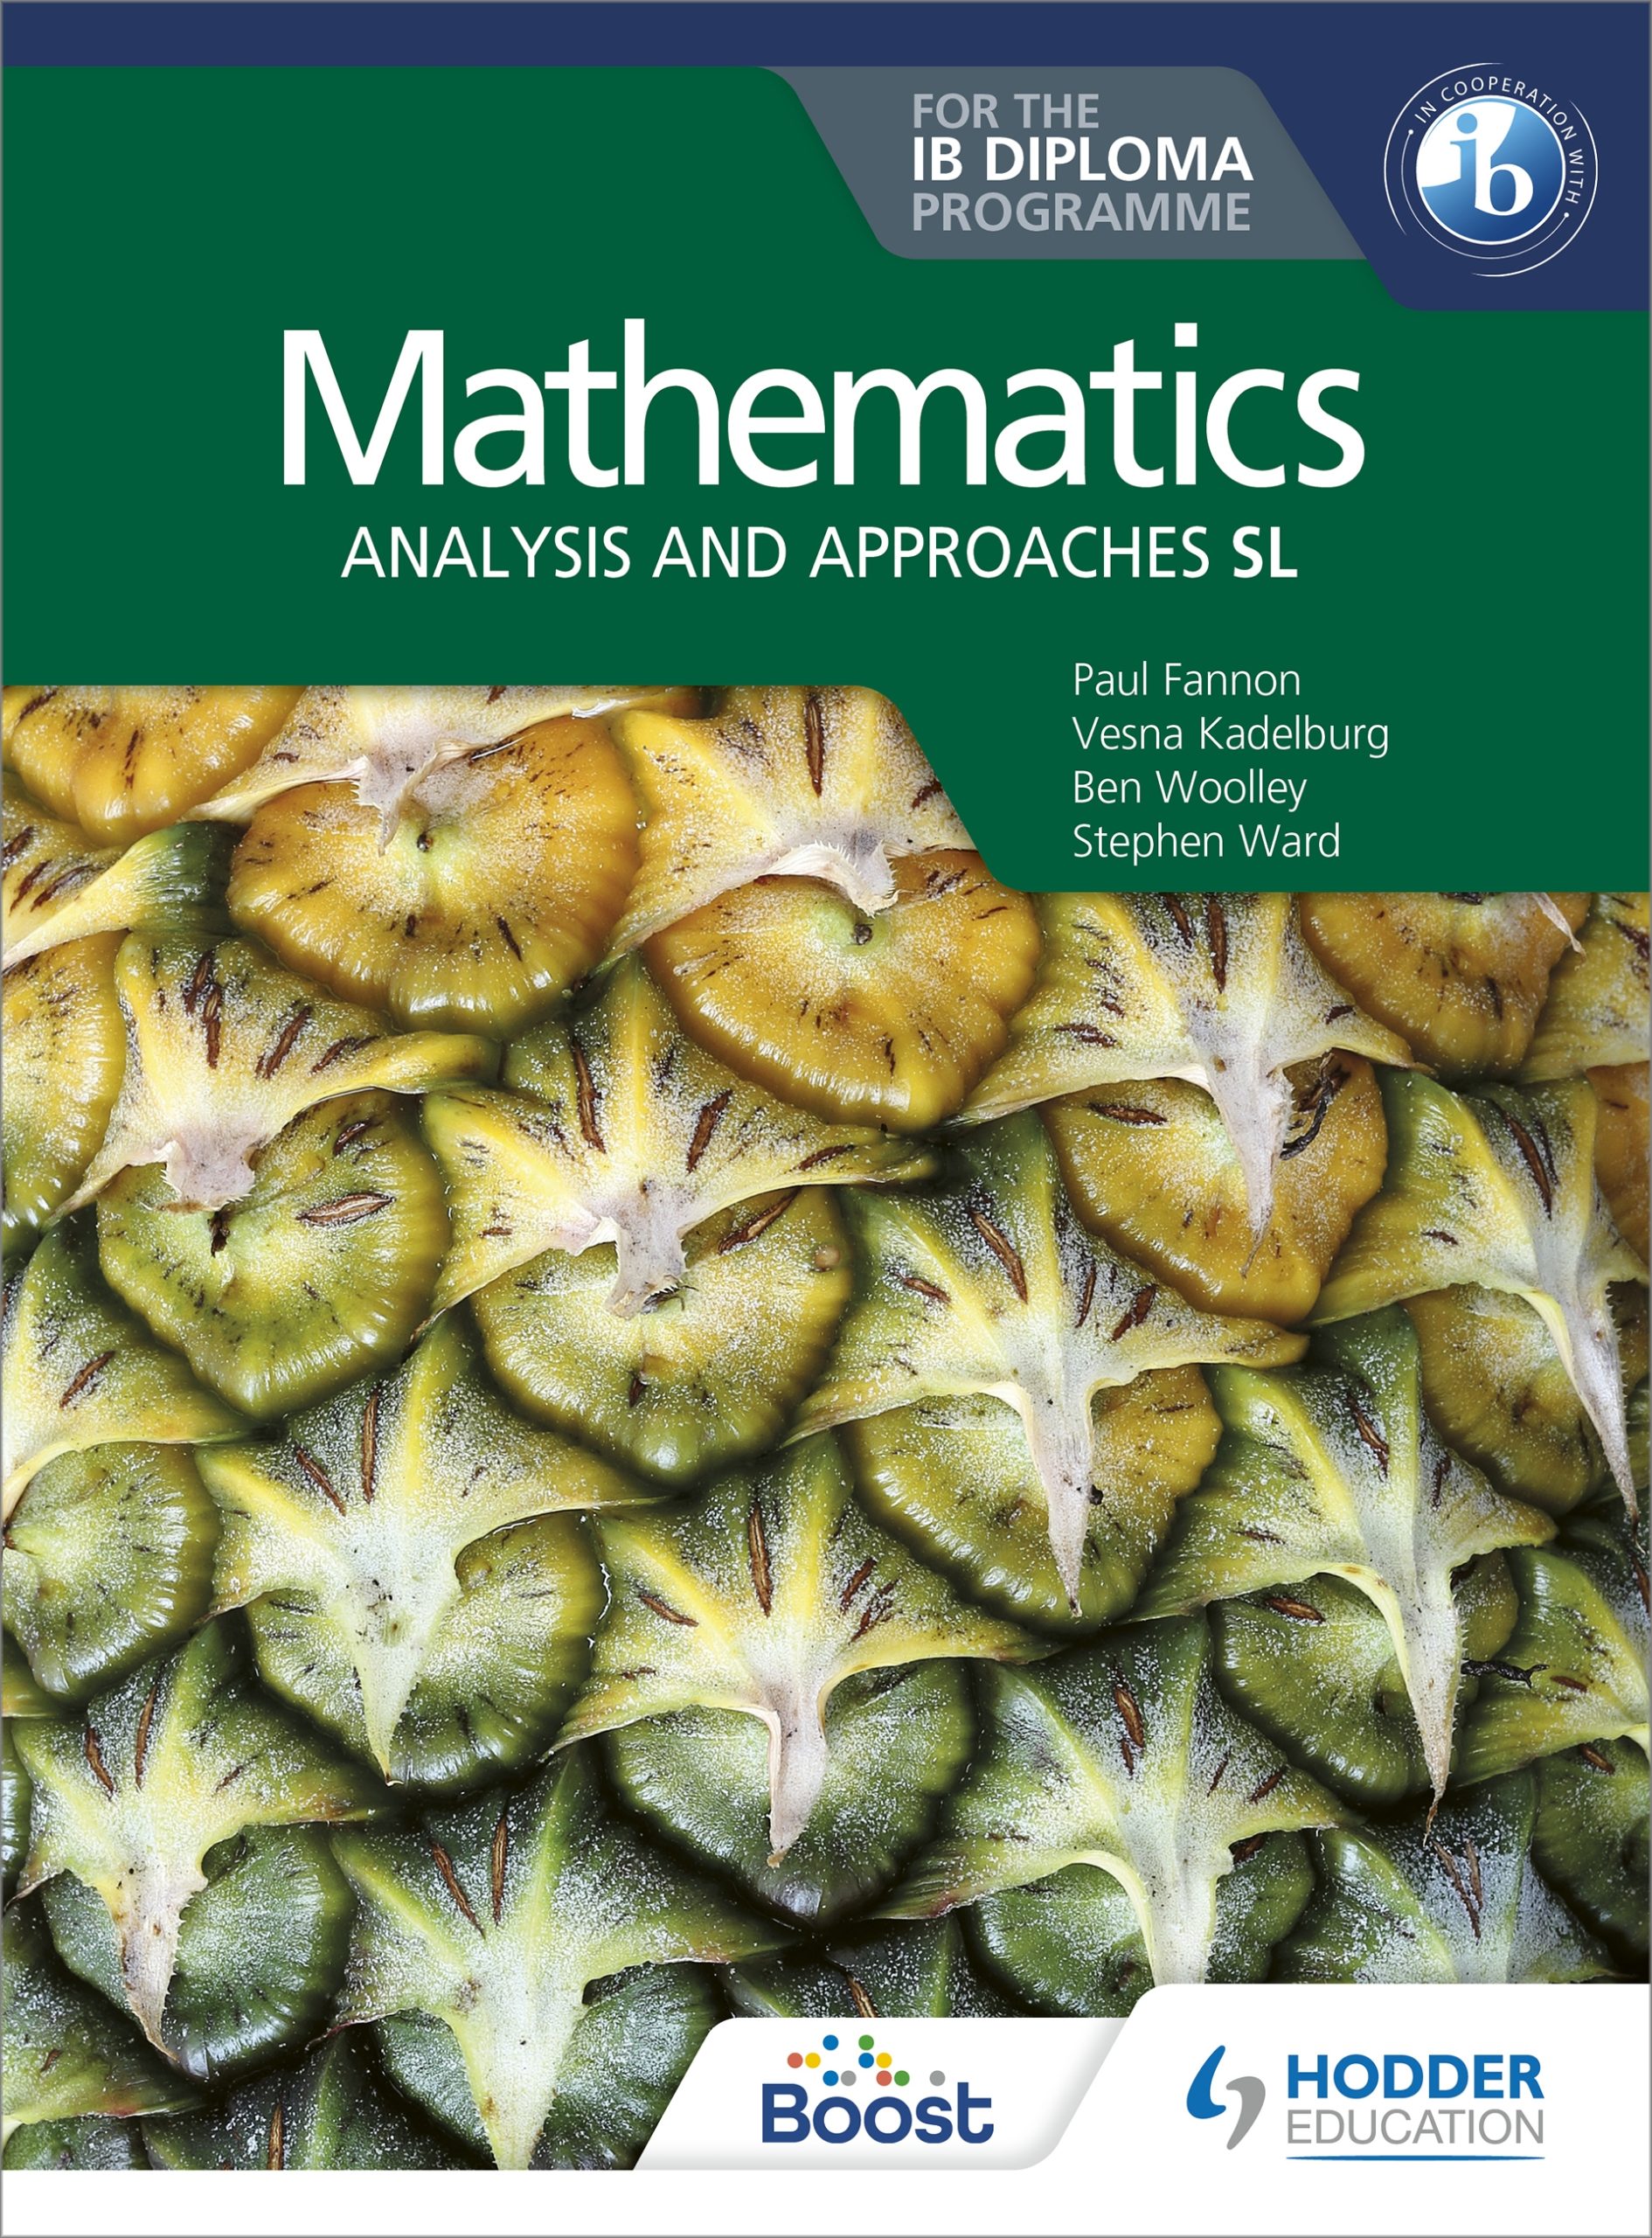 Featured image for “Mathematics for the IB Diploma: Analysis and approaches SL”